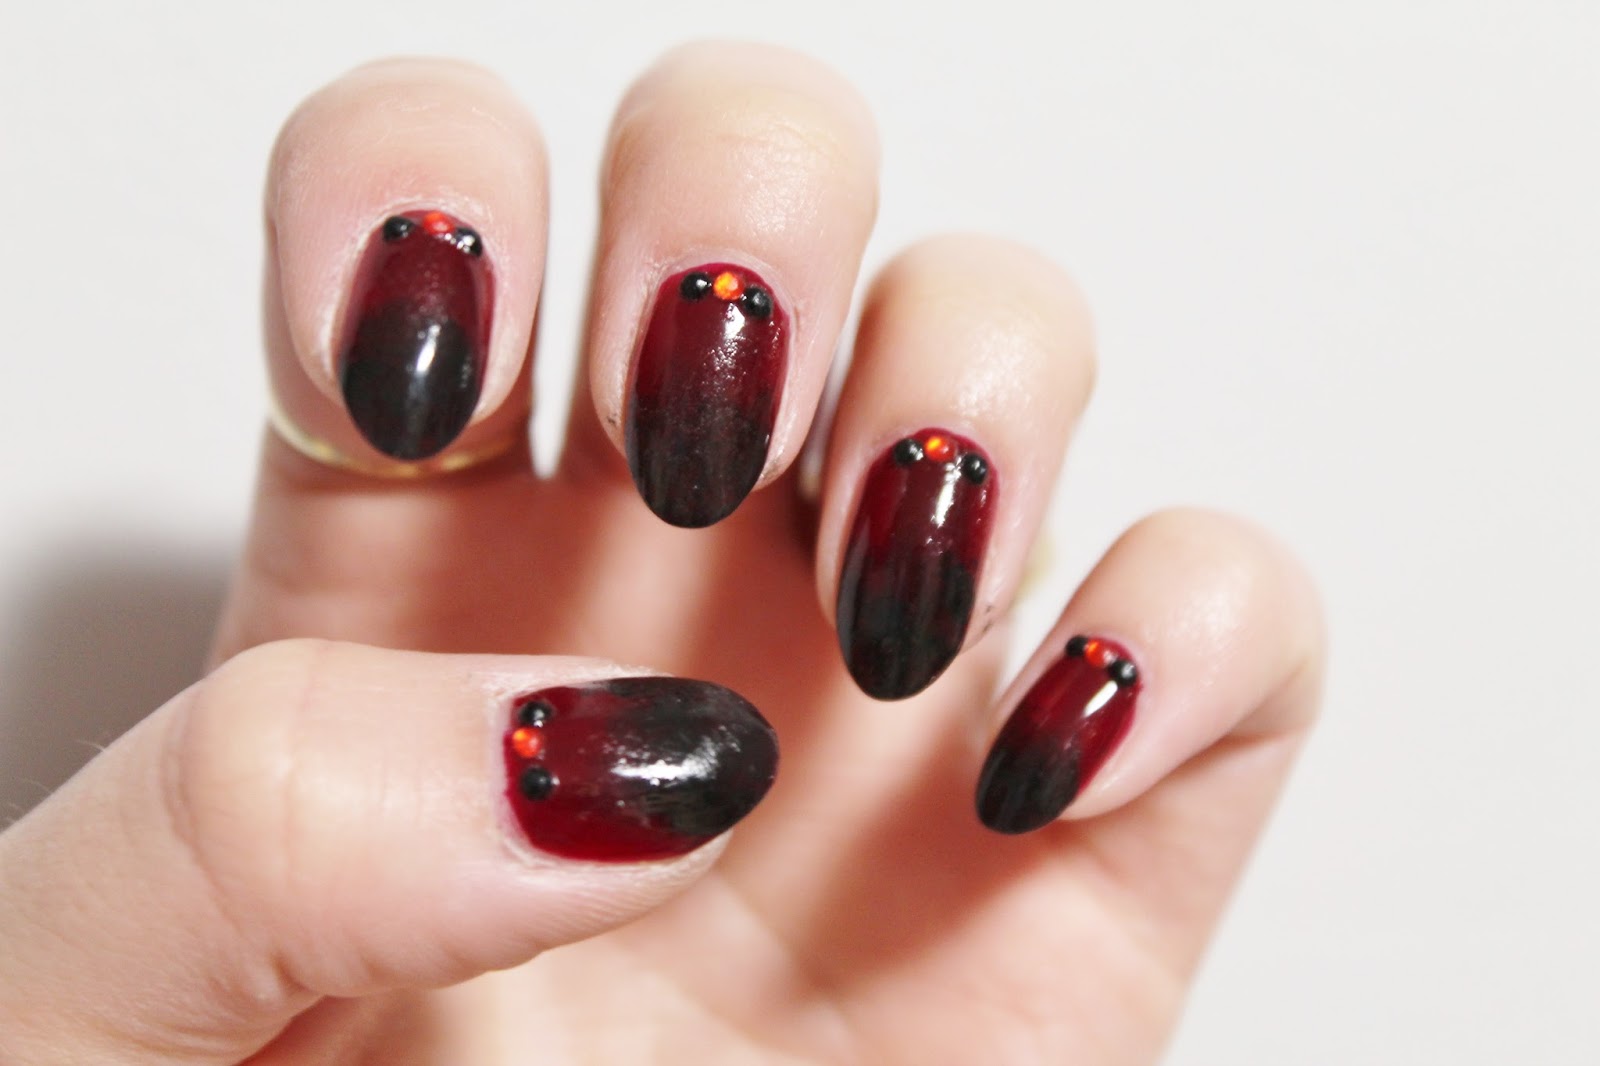 3. Edgy Black and Red Ombre Nails - wide 8